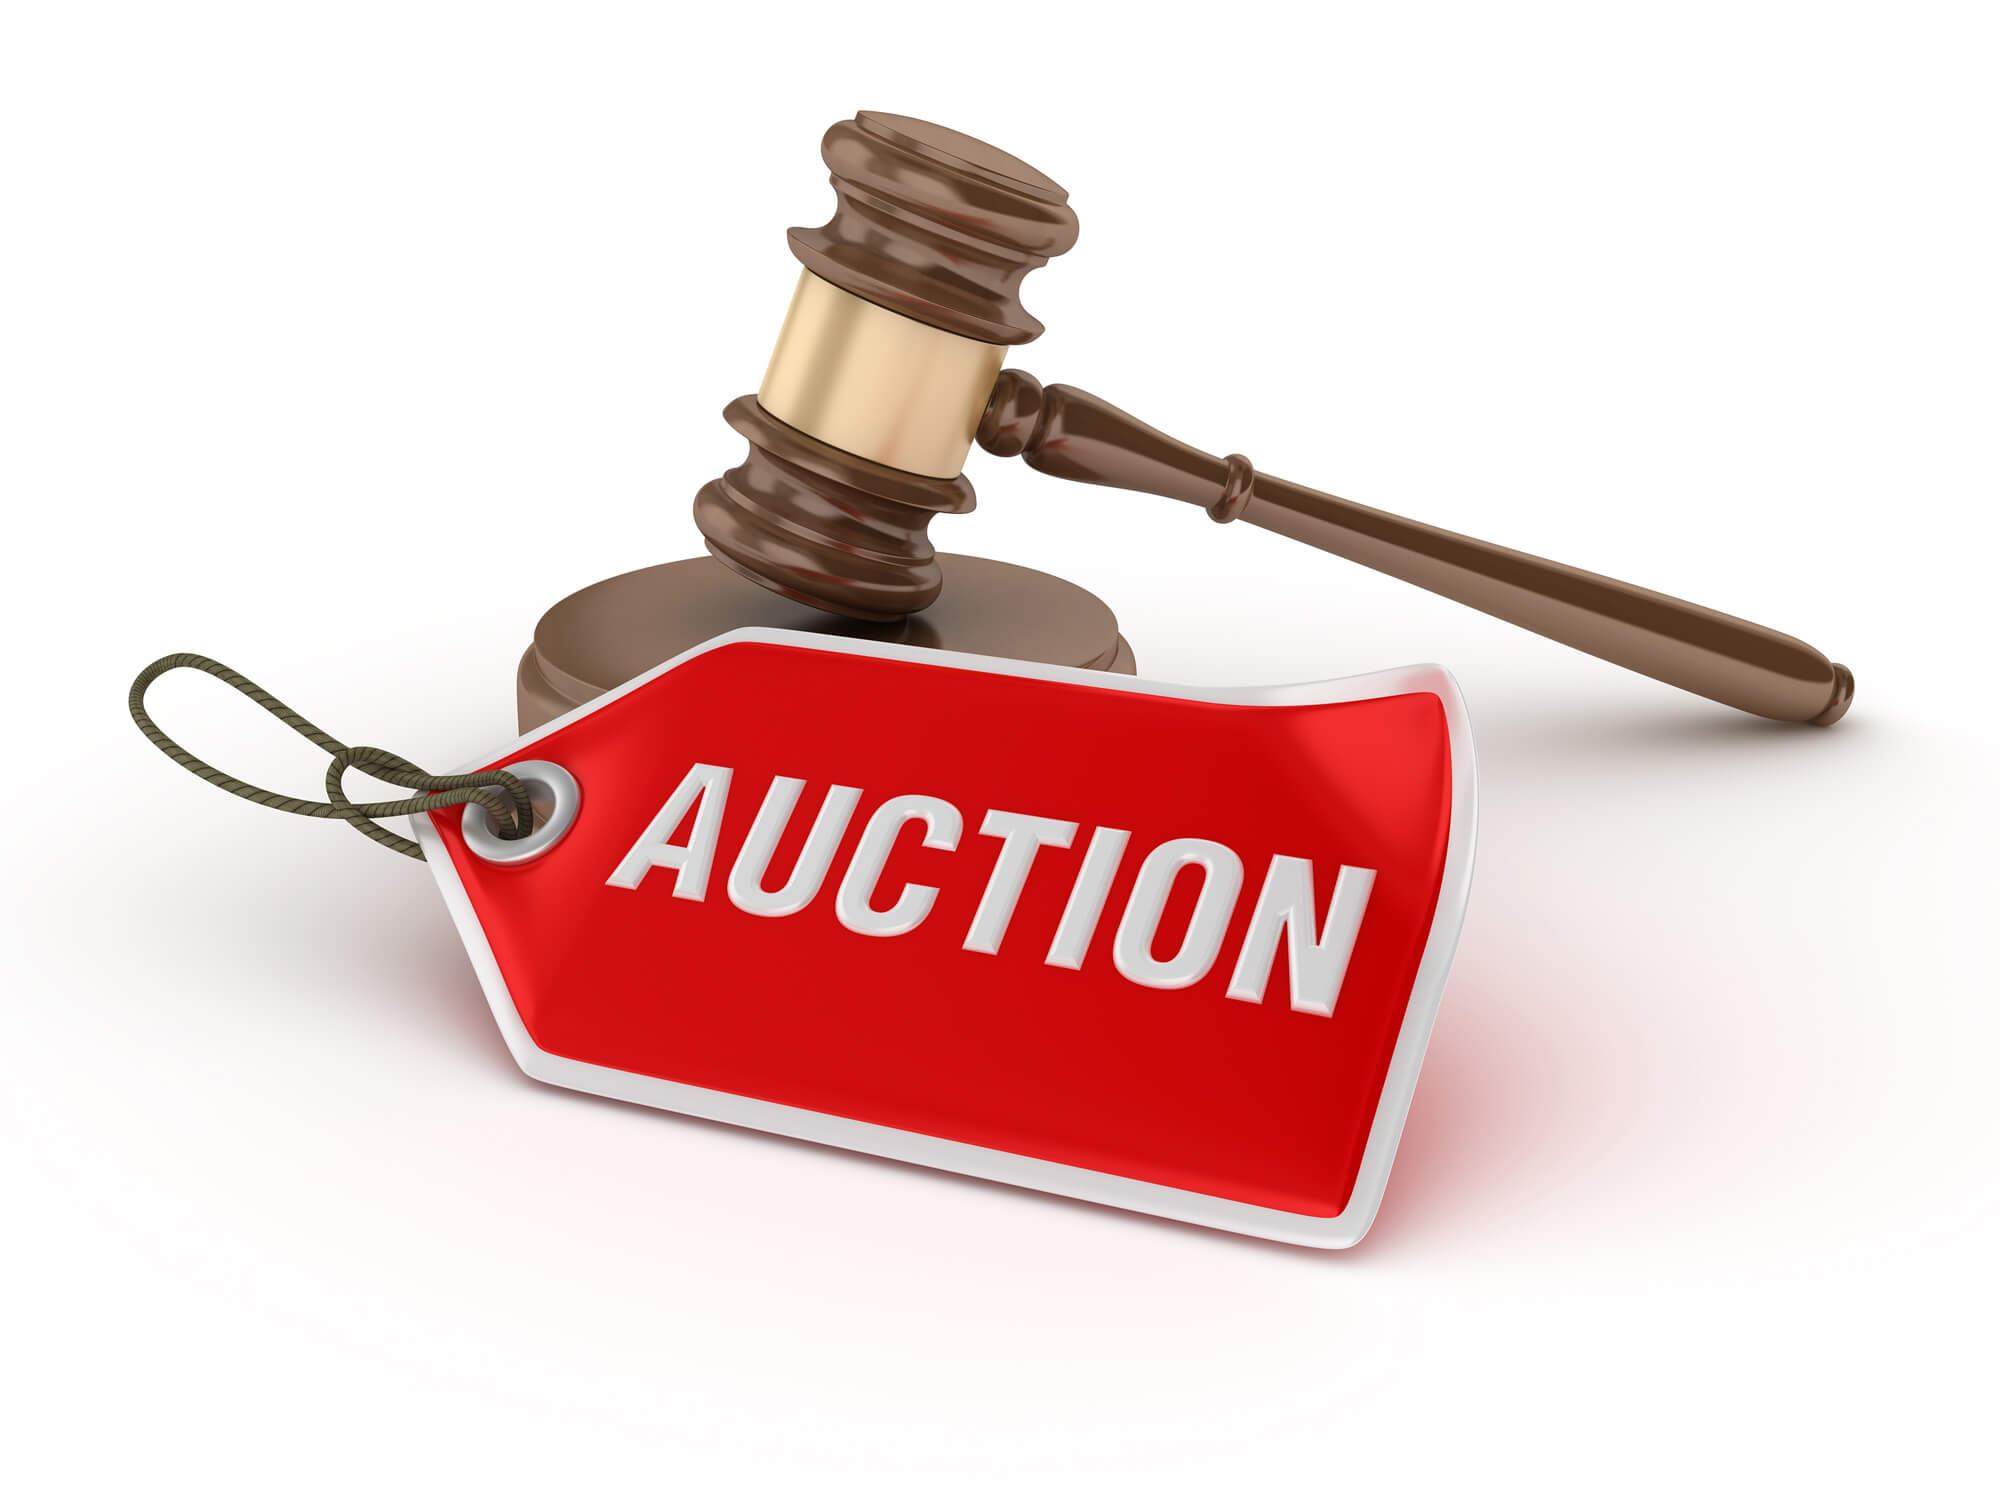 Thinking of An Auction?